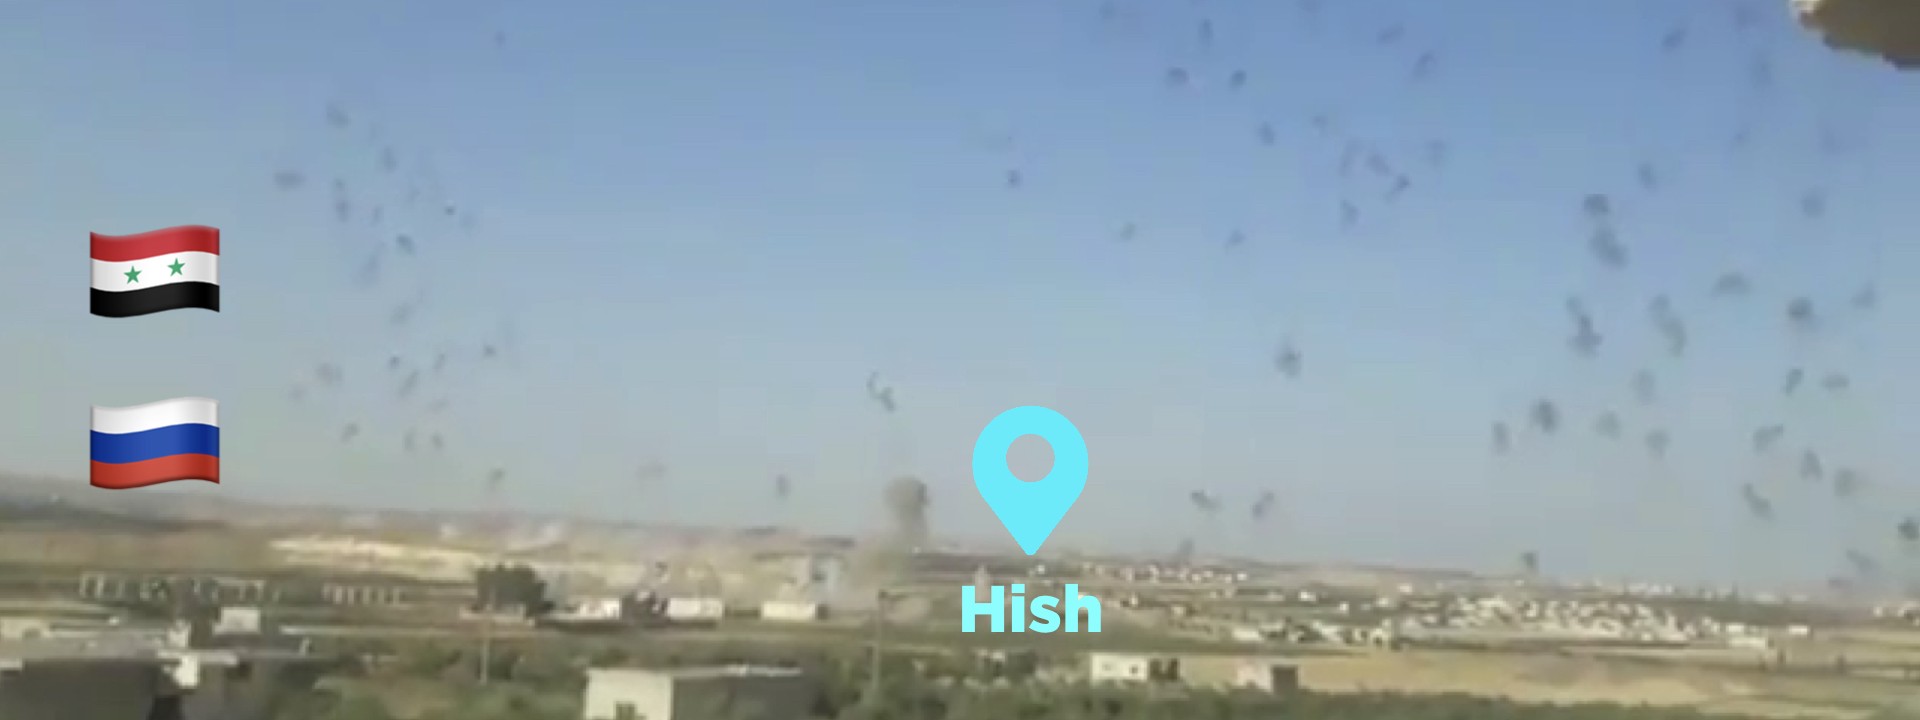 Cluster Munitions Use in Hish, Syria